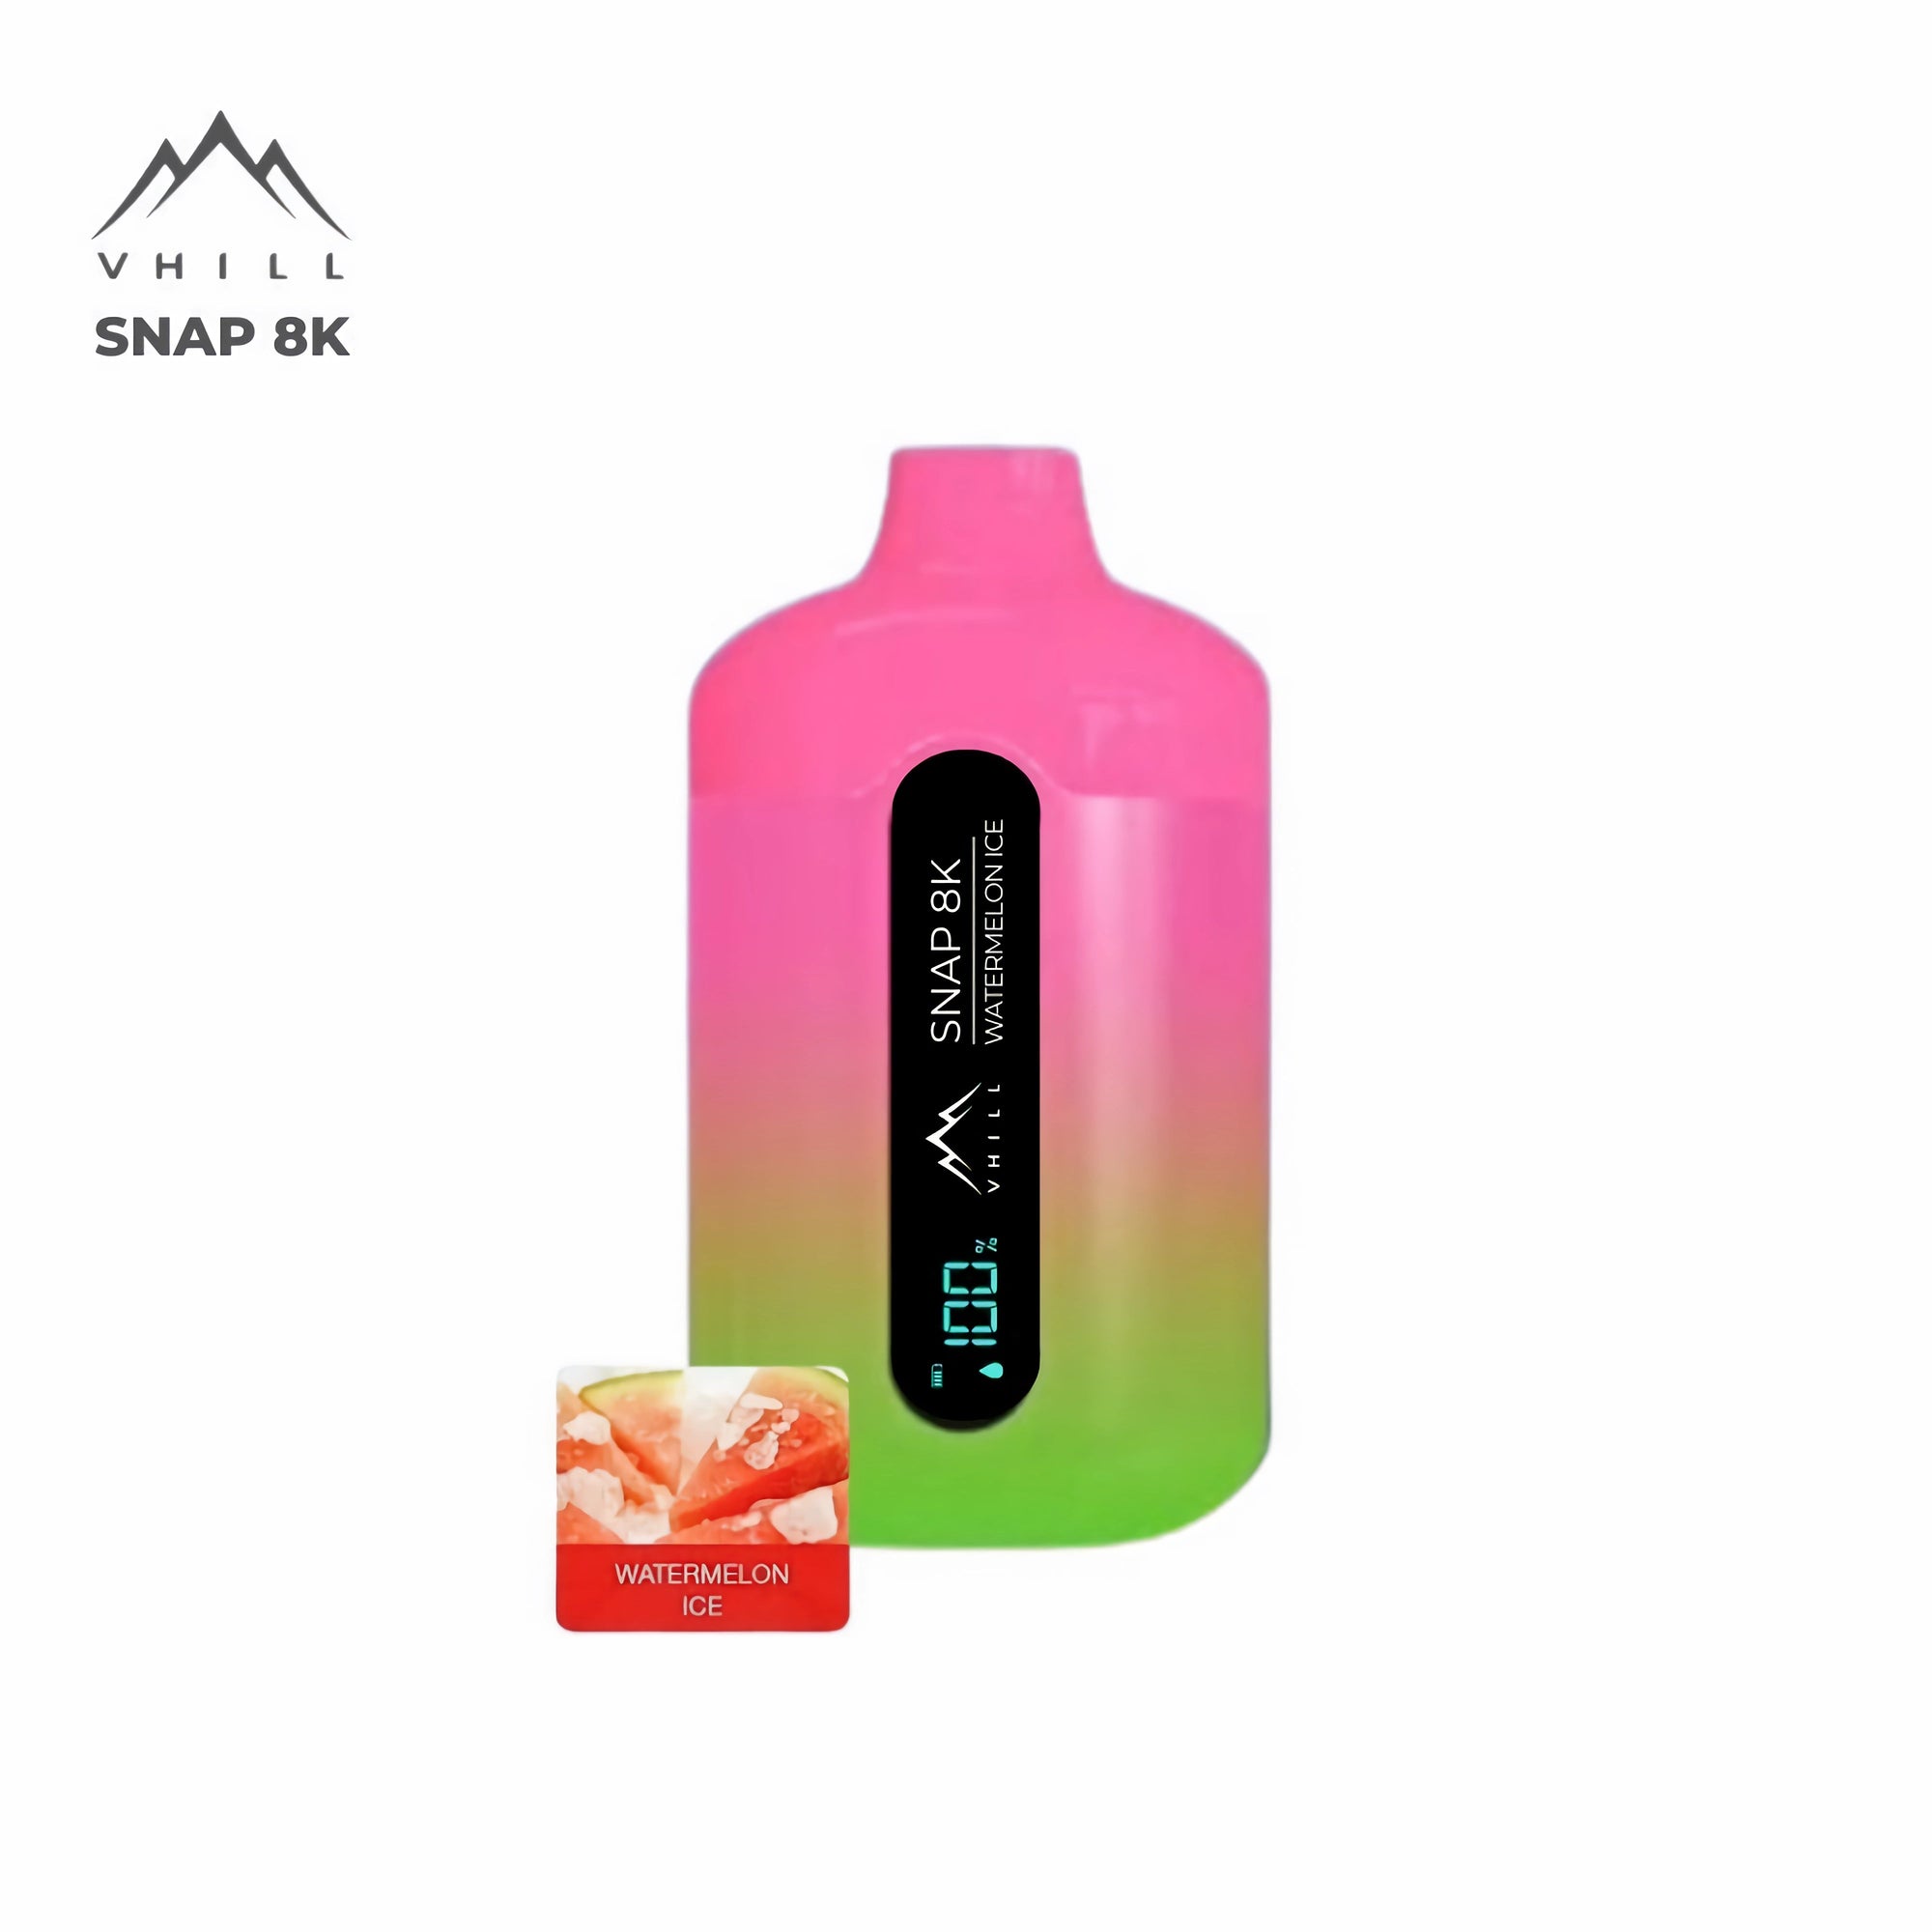 [Disposables] VHILL Snap - Watermelon Ice Disposable Pod Systems Vancouver Toronto Calgary Richmond Montreal Kingsway Winnipeg Quebec Coquitlam Canada Canadian Vapes Shop Free Shipping E-Juice Mods Nic Salt